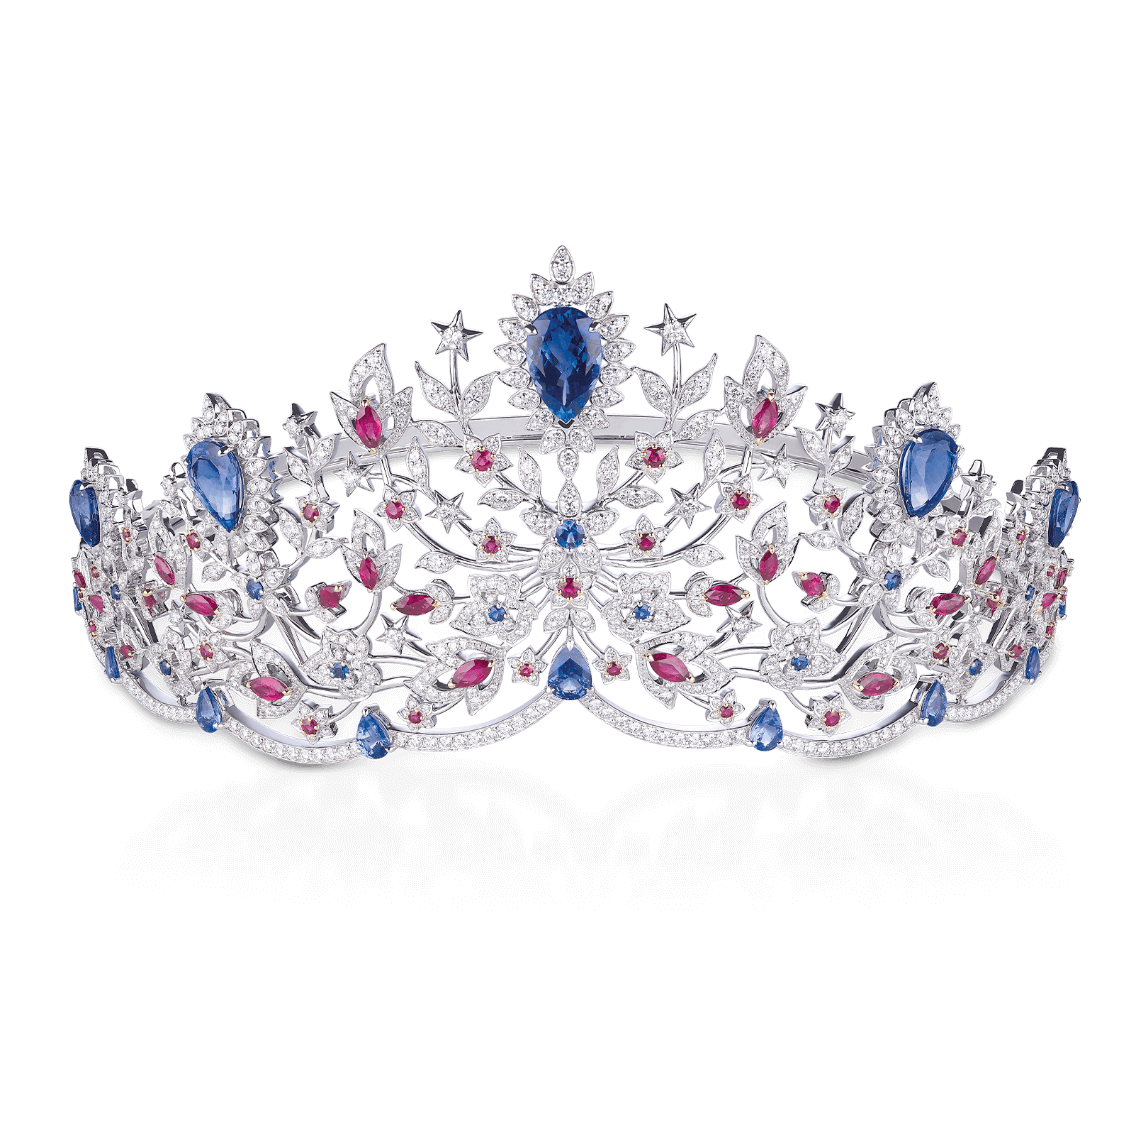 Exquisite Crafted Crowns by Mouawad | Regal Elegance u0026 Luxury